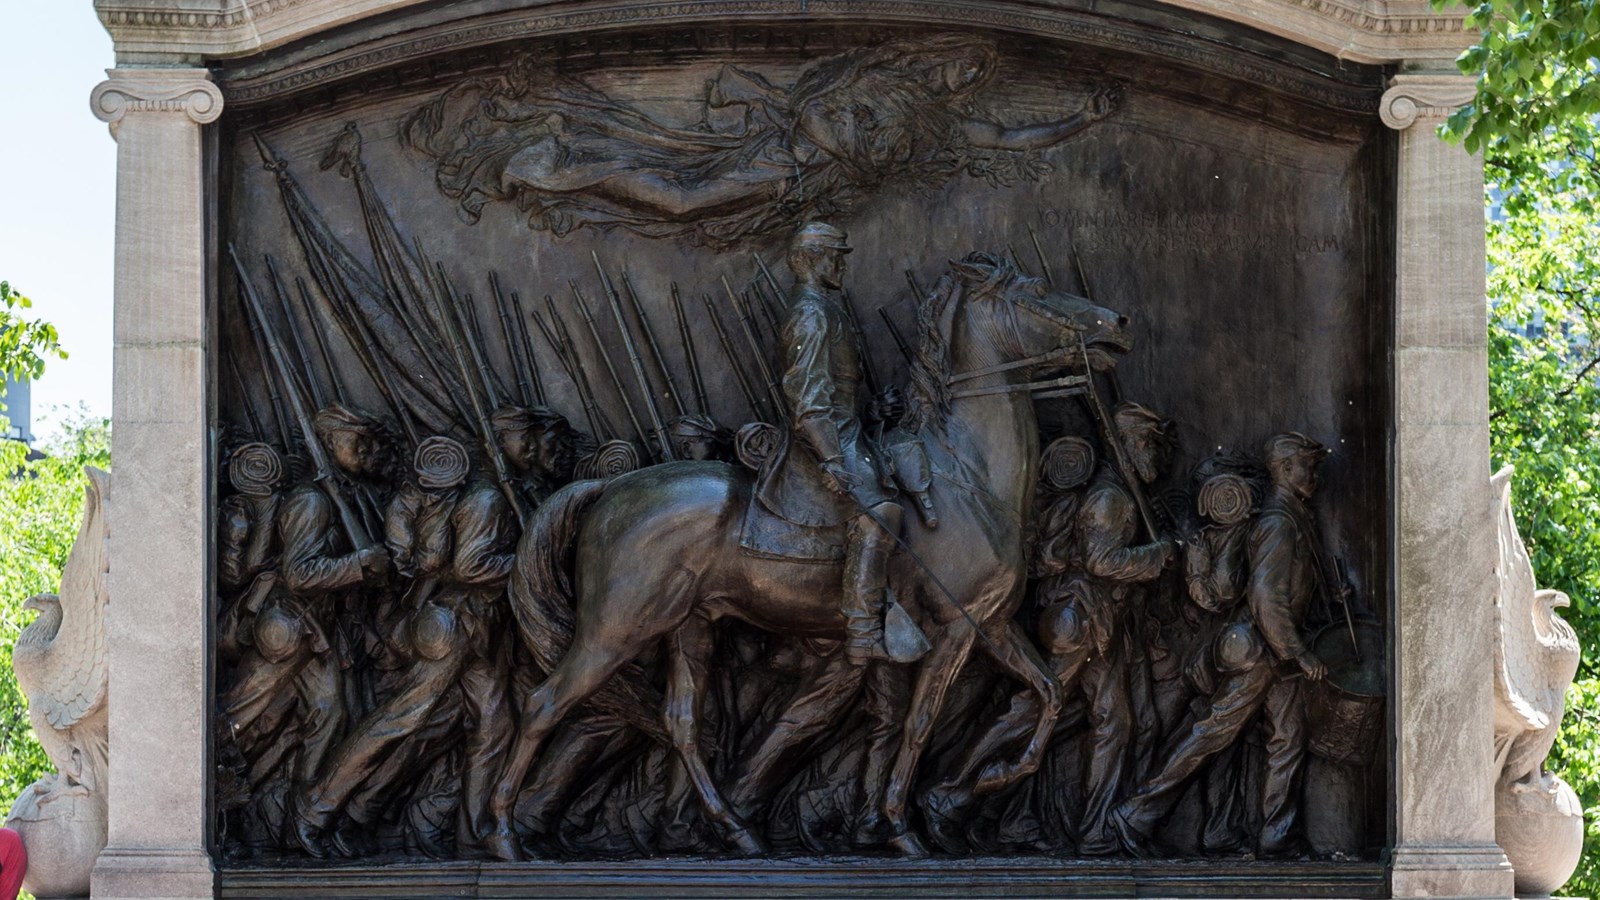 Monument of a man on a horse with multiple soldiers marching around him.